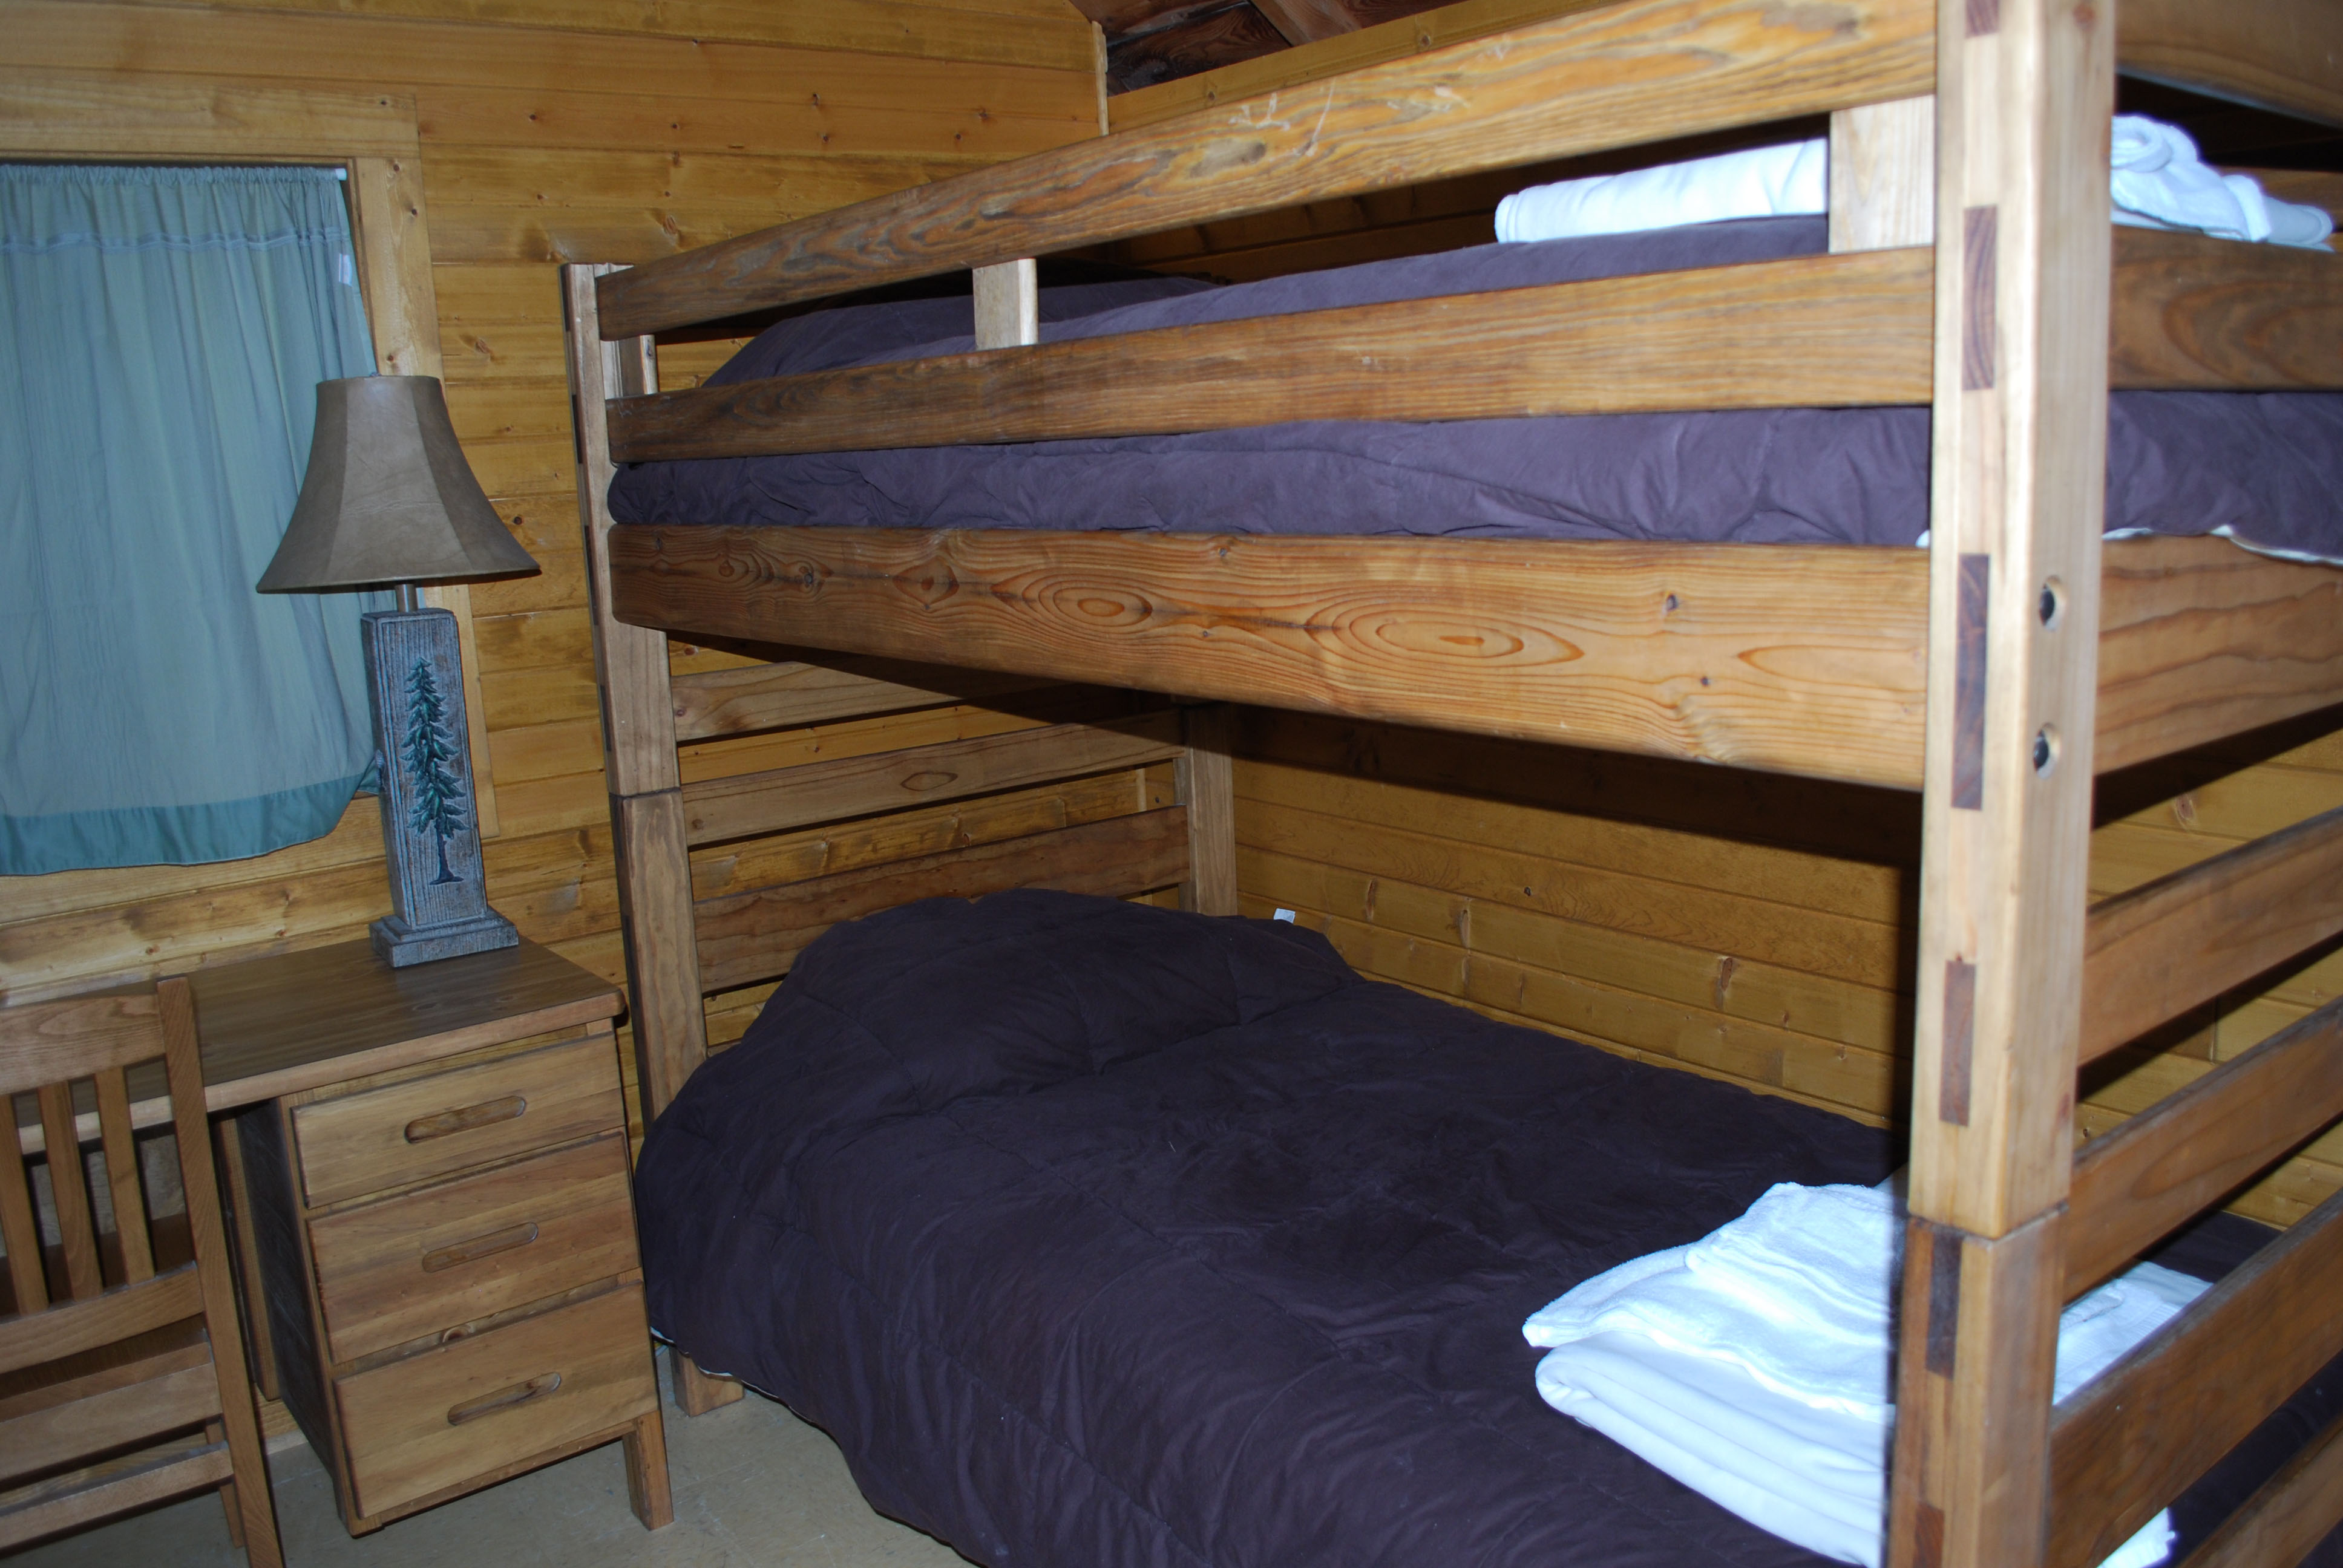 Inside of cabin on the hill room with bunkbeds